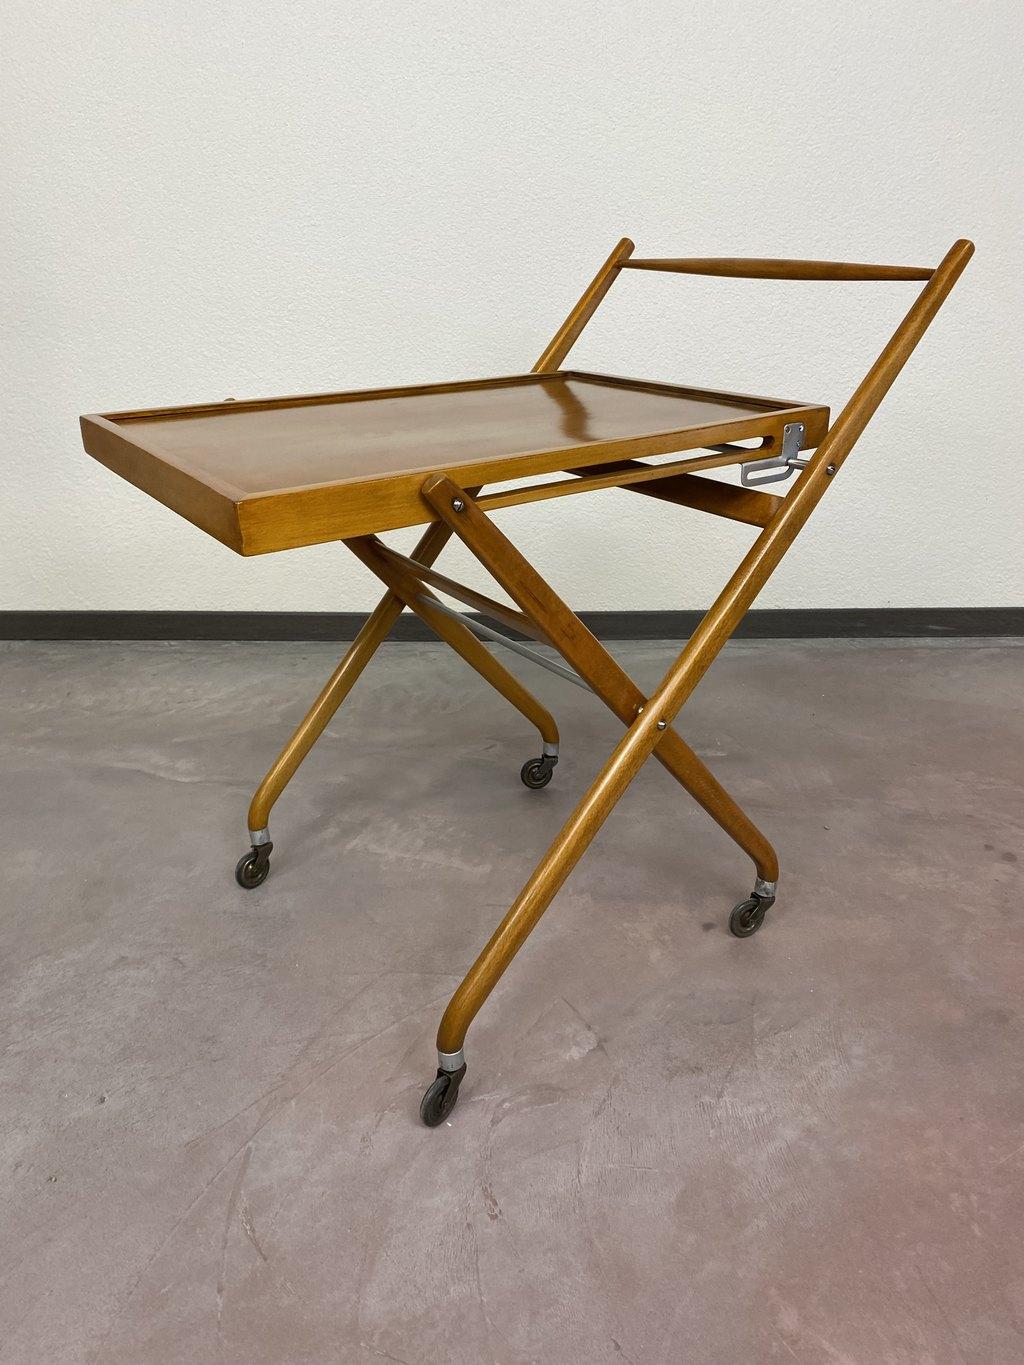 Functionalist folding trolley by Thonet Mundus professionally stained and repolished.